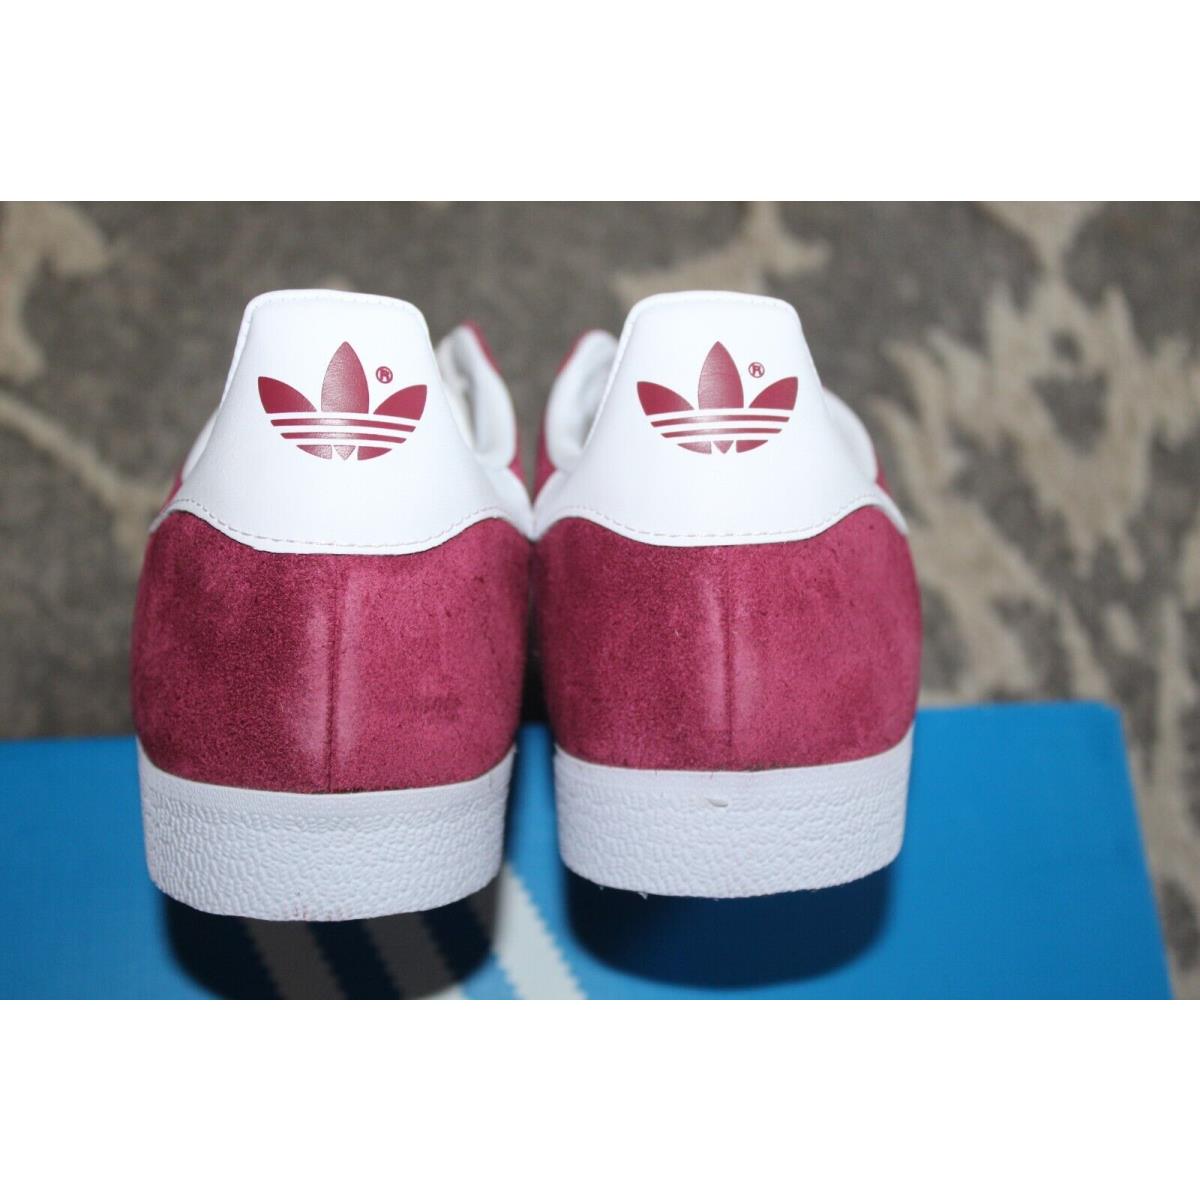 Adidas shoes Gazelle - Red 6